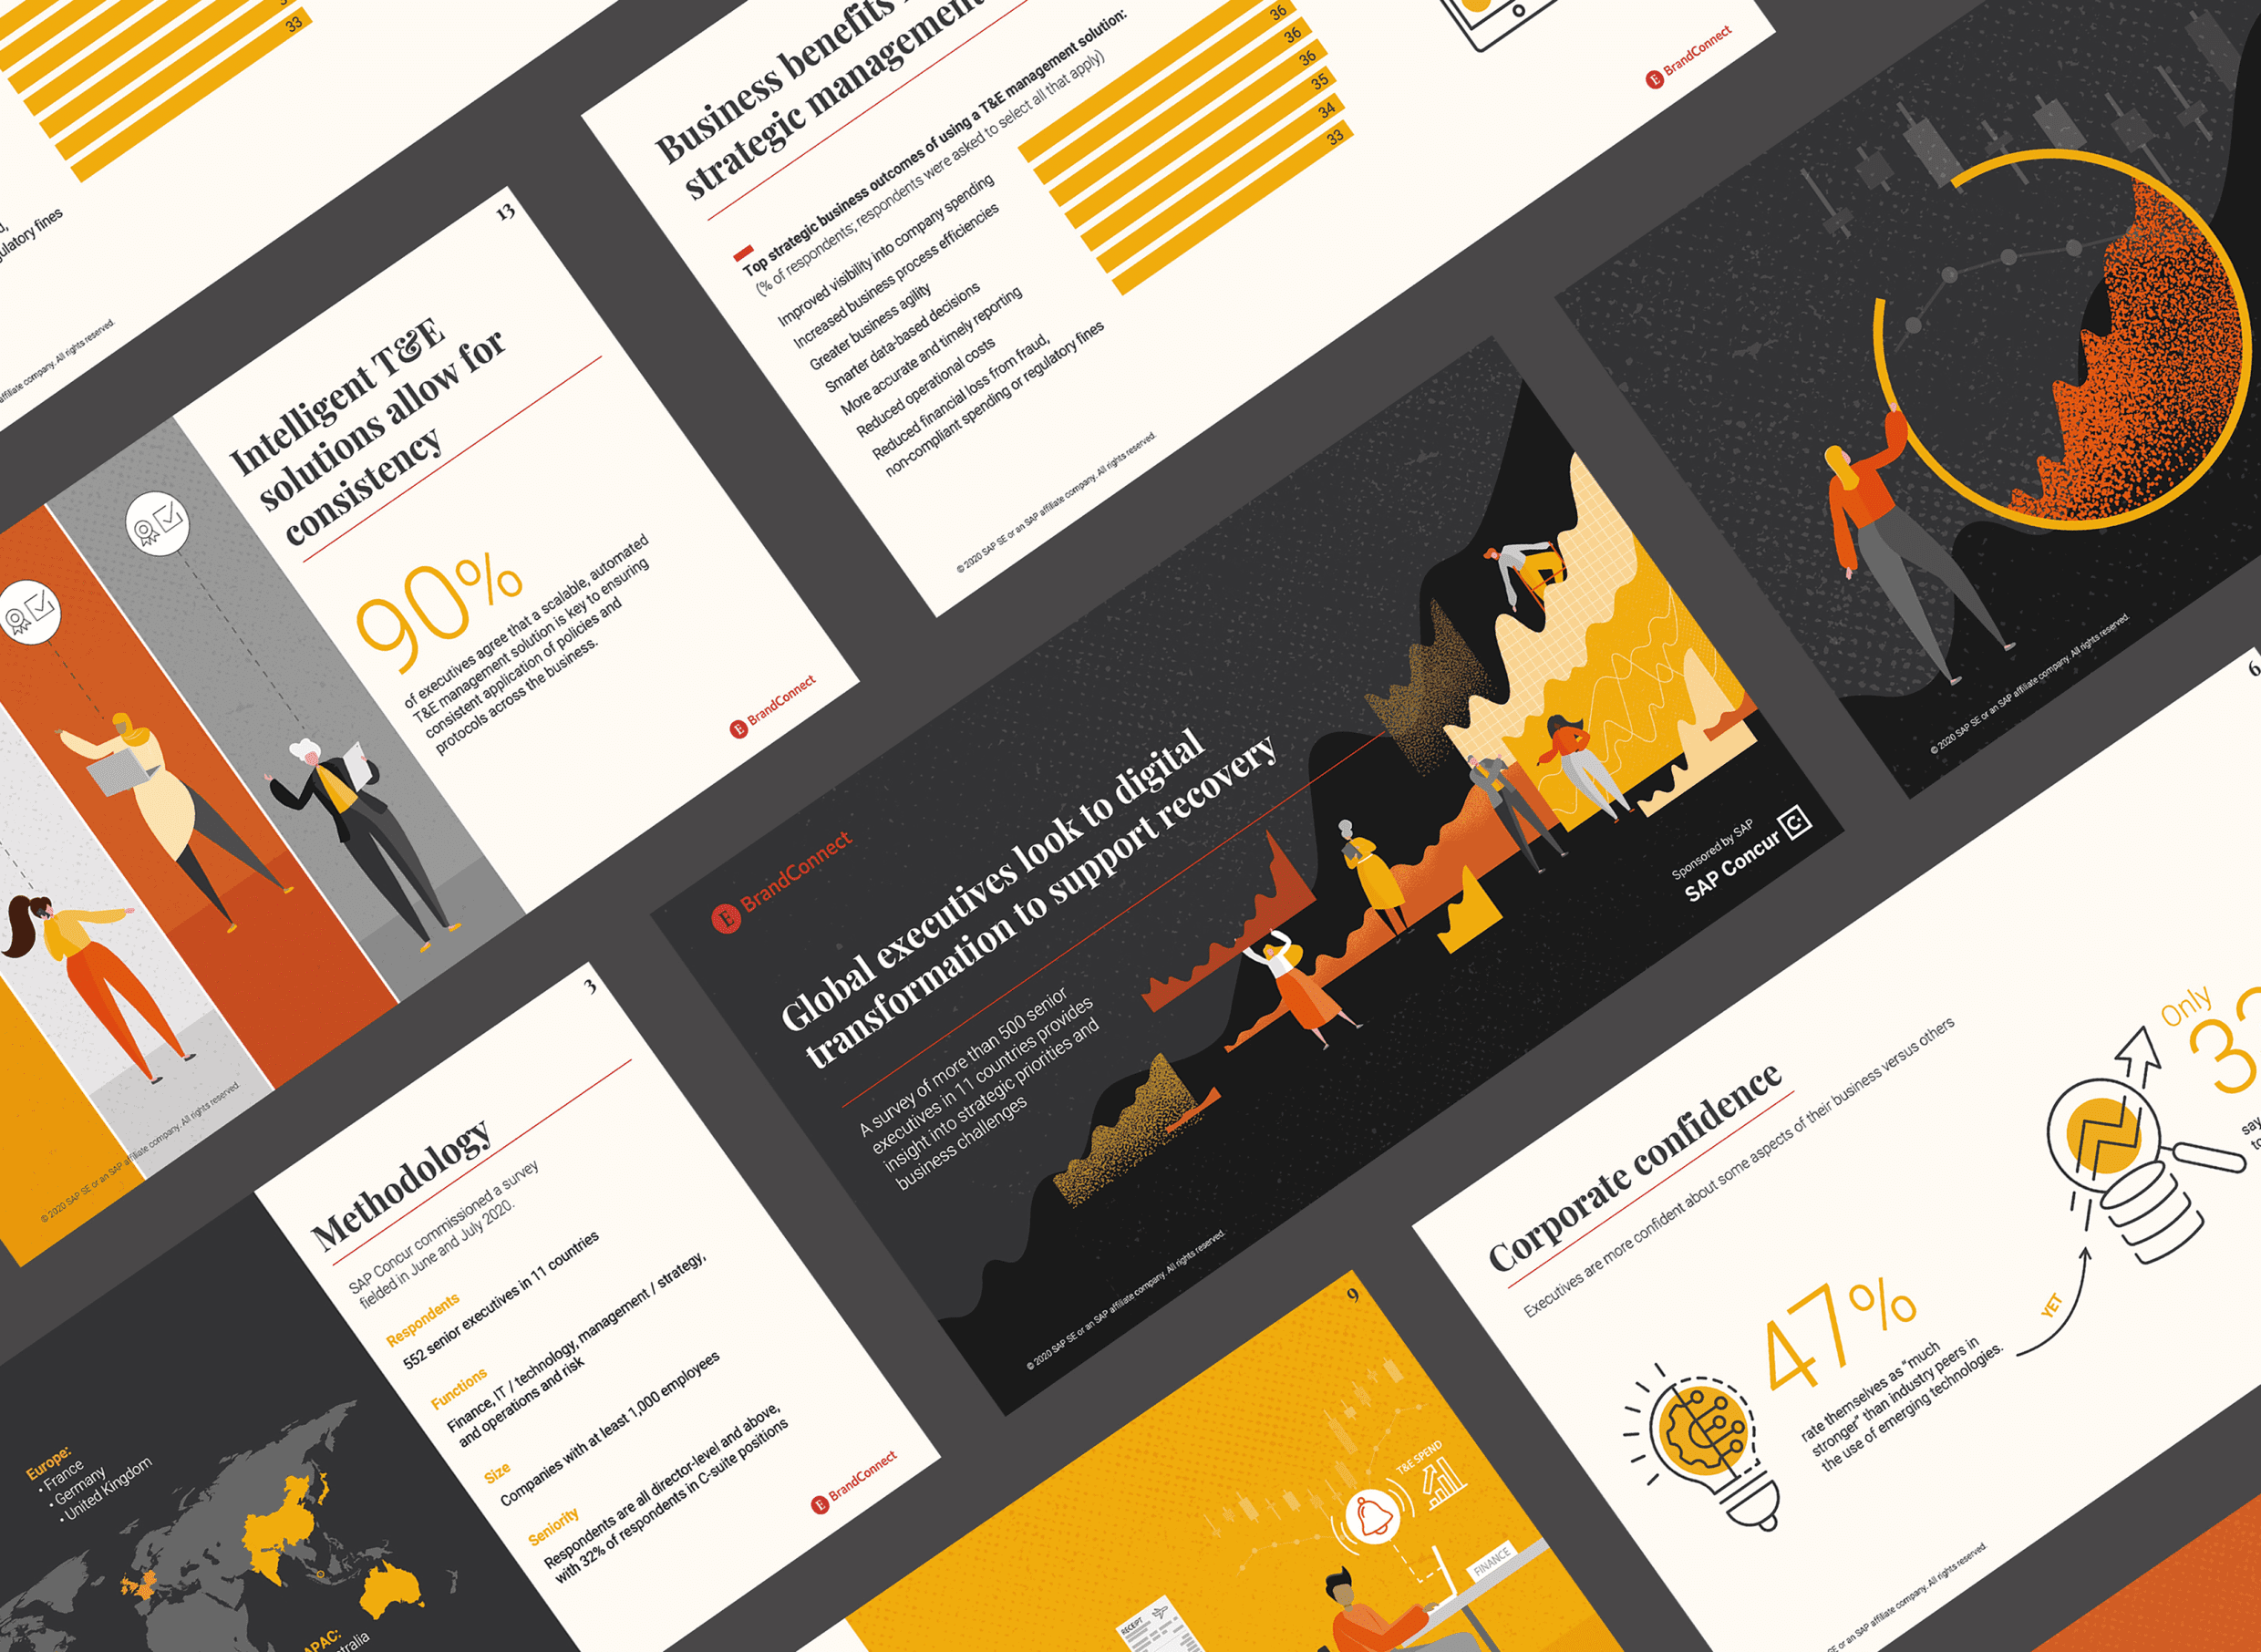 Several pages of professional presentation designs in dark and warm colors layout combination.